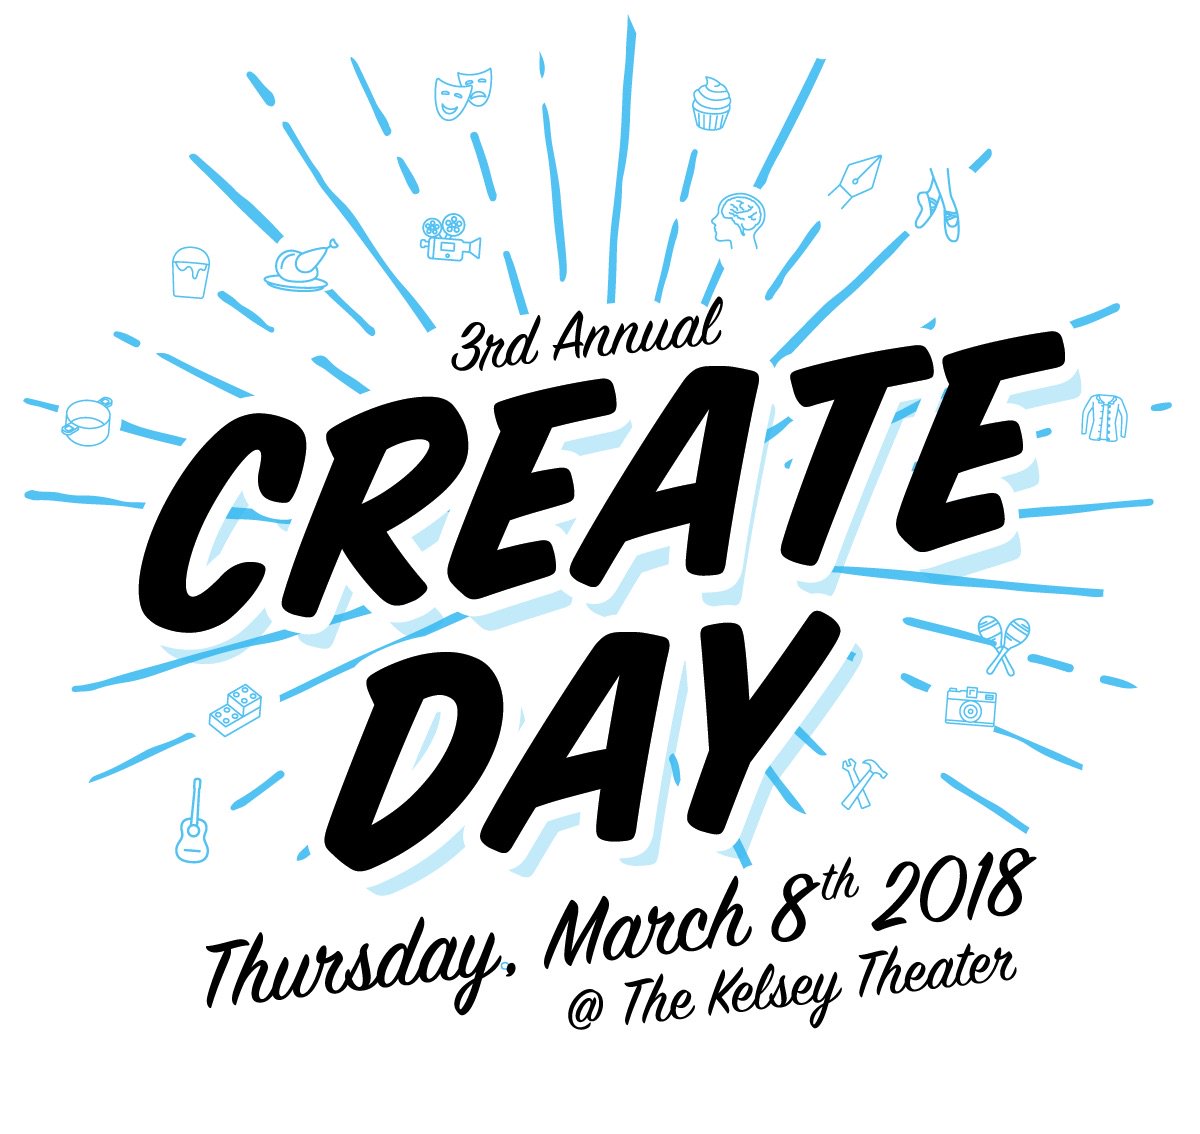 We are so excited because #CreateDay is only a week away. If you haven't gotten your tickets, don't hesitate a moment longer, because this year is going to be even better! #CreateDay2018 #GetYourHandsDirty